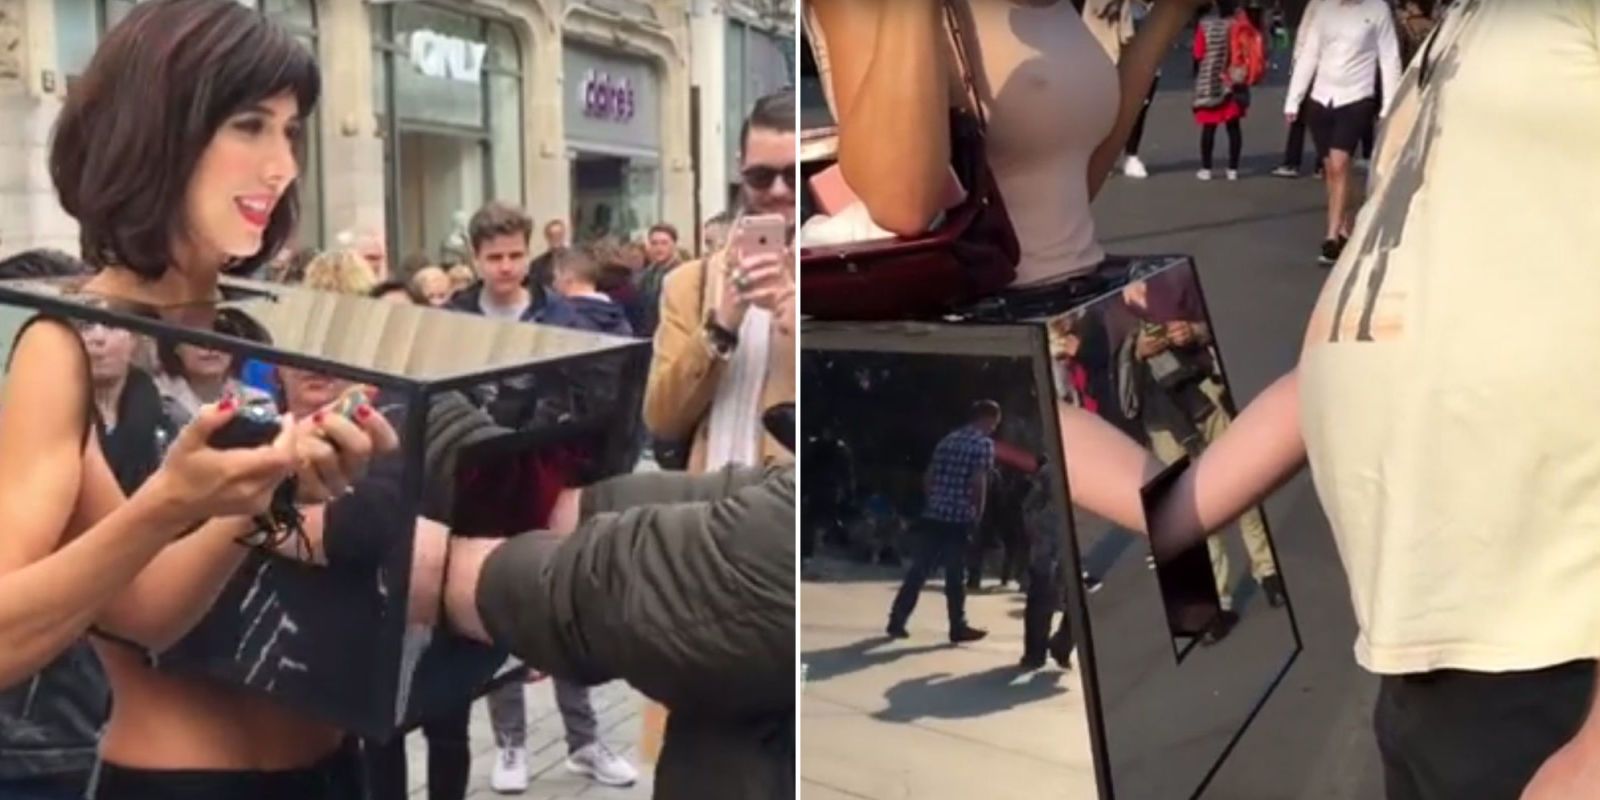 Artist Milo Moire Let People Touch Her Vagina in Public image